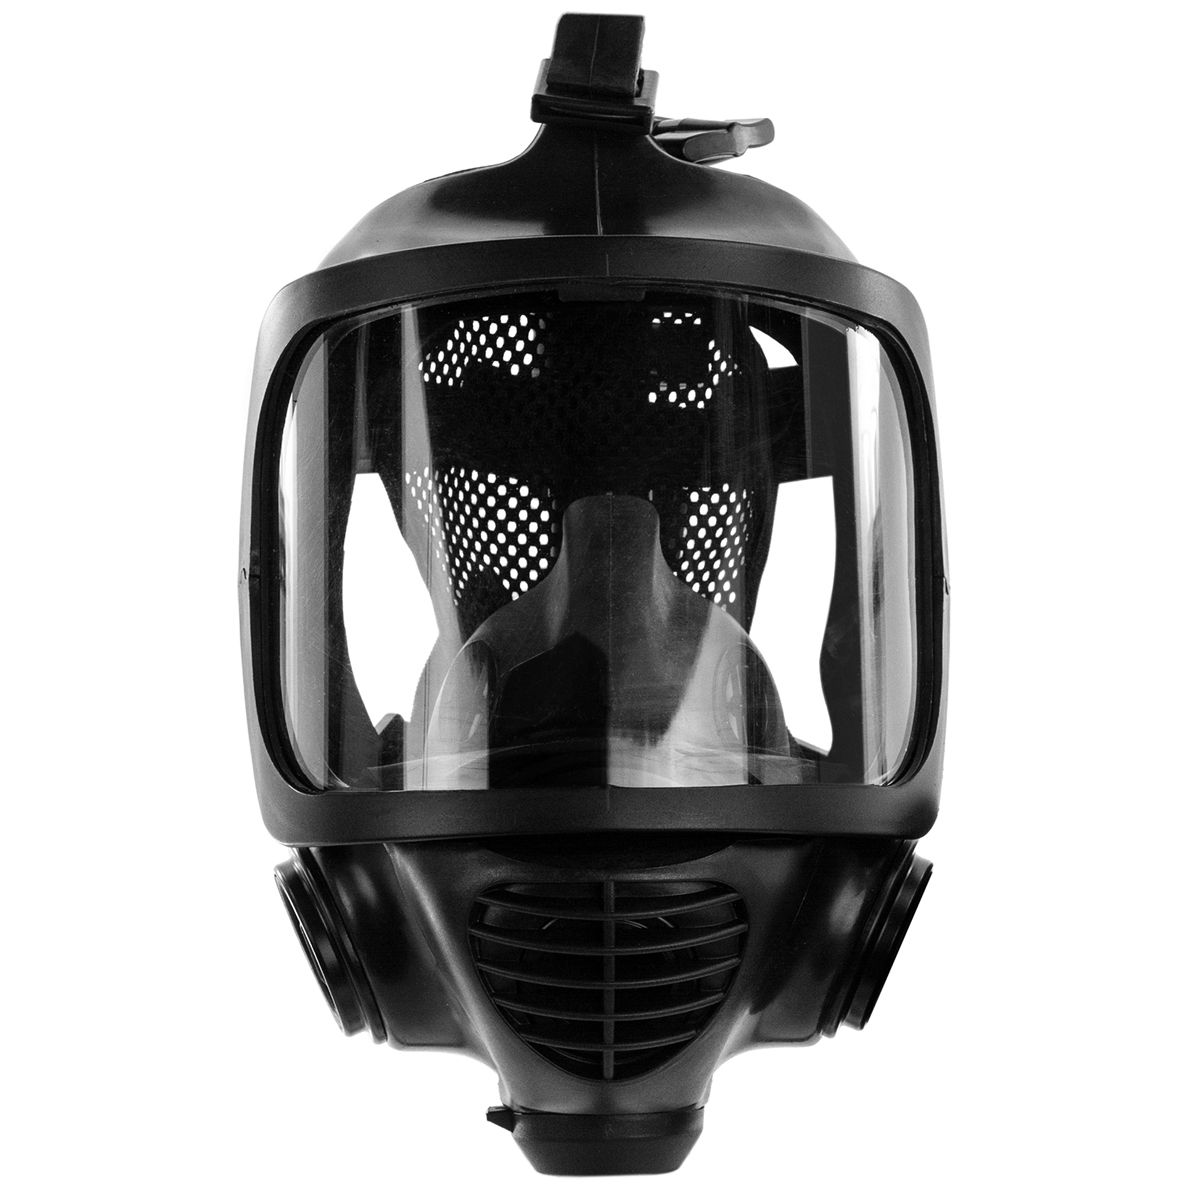 ACE Calypso CM-6 Full Face Mask - Work & Emergency Respirator - Rd40 Connection for Two Filters